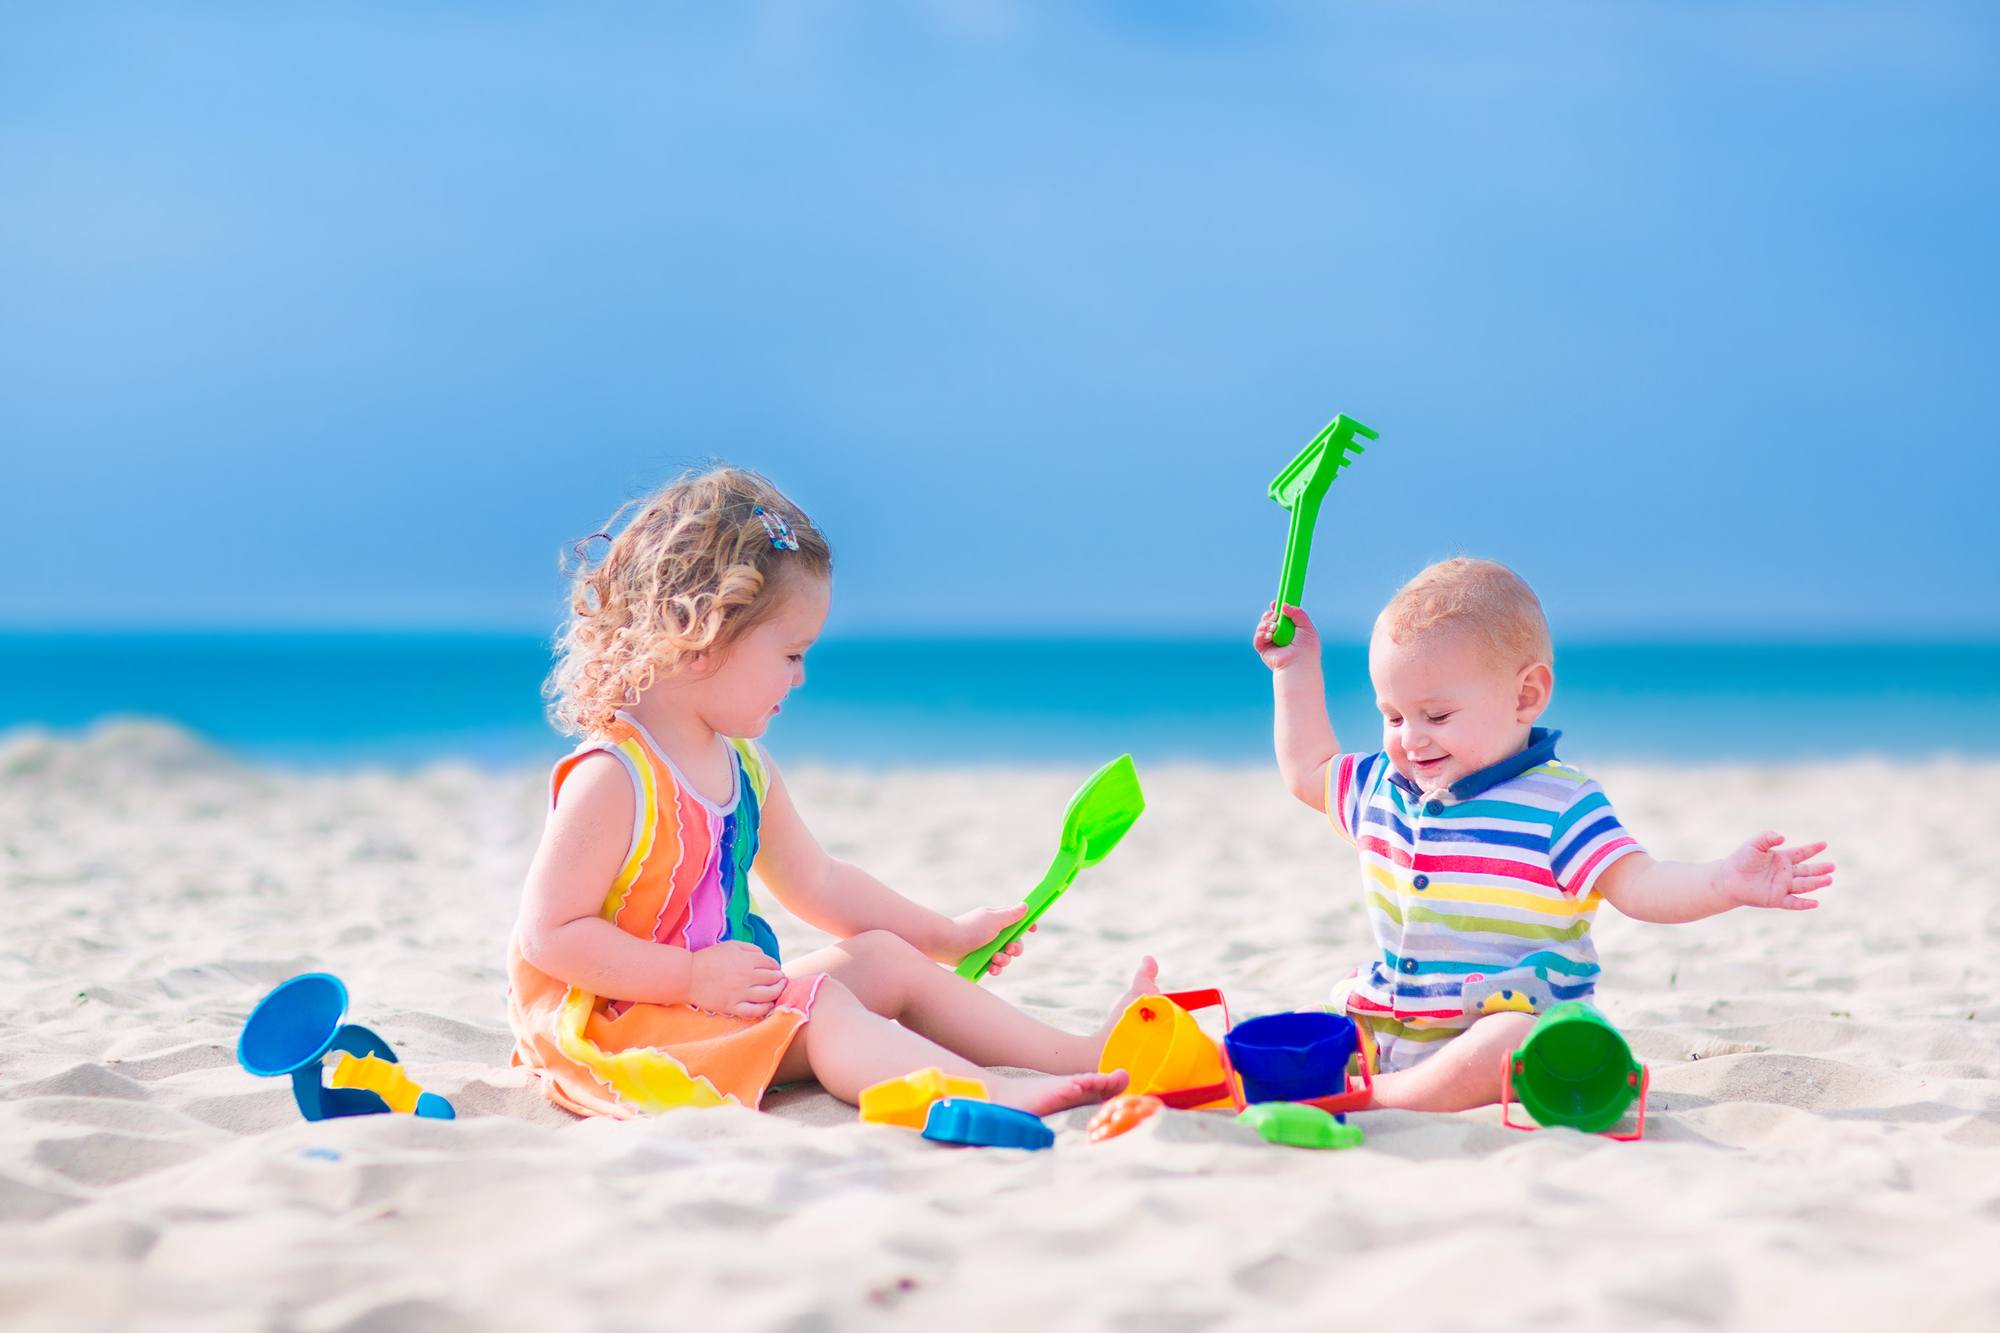 Baby and toddler on beach